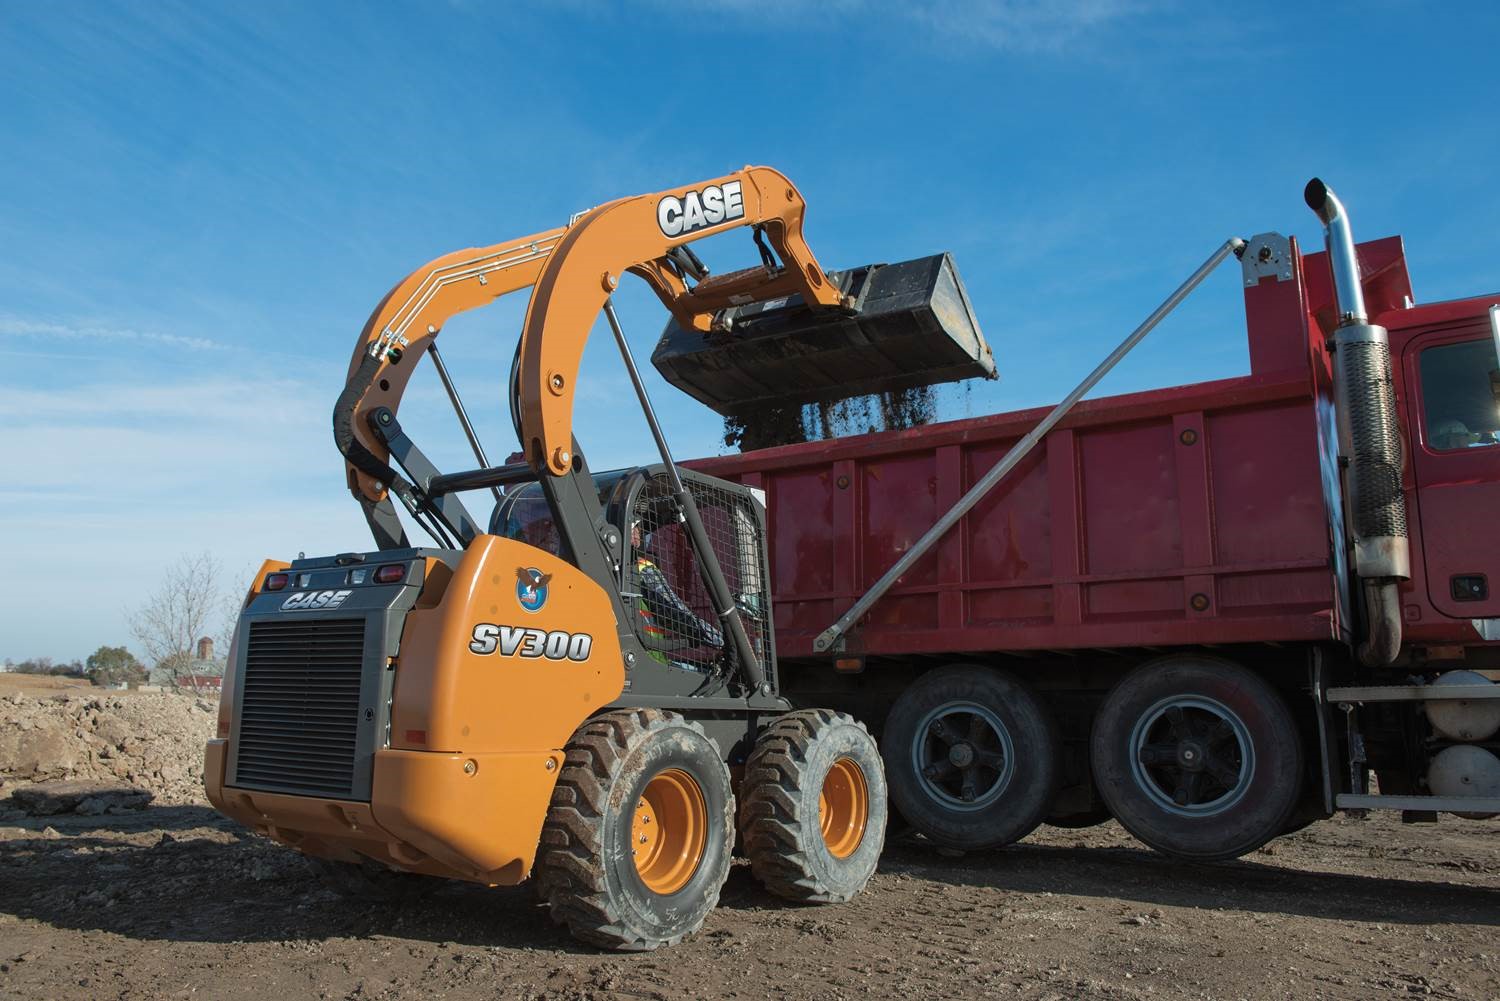 Here is a basic rundown of the different types of tires that are available for Skid Steer Loaders